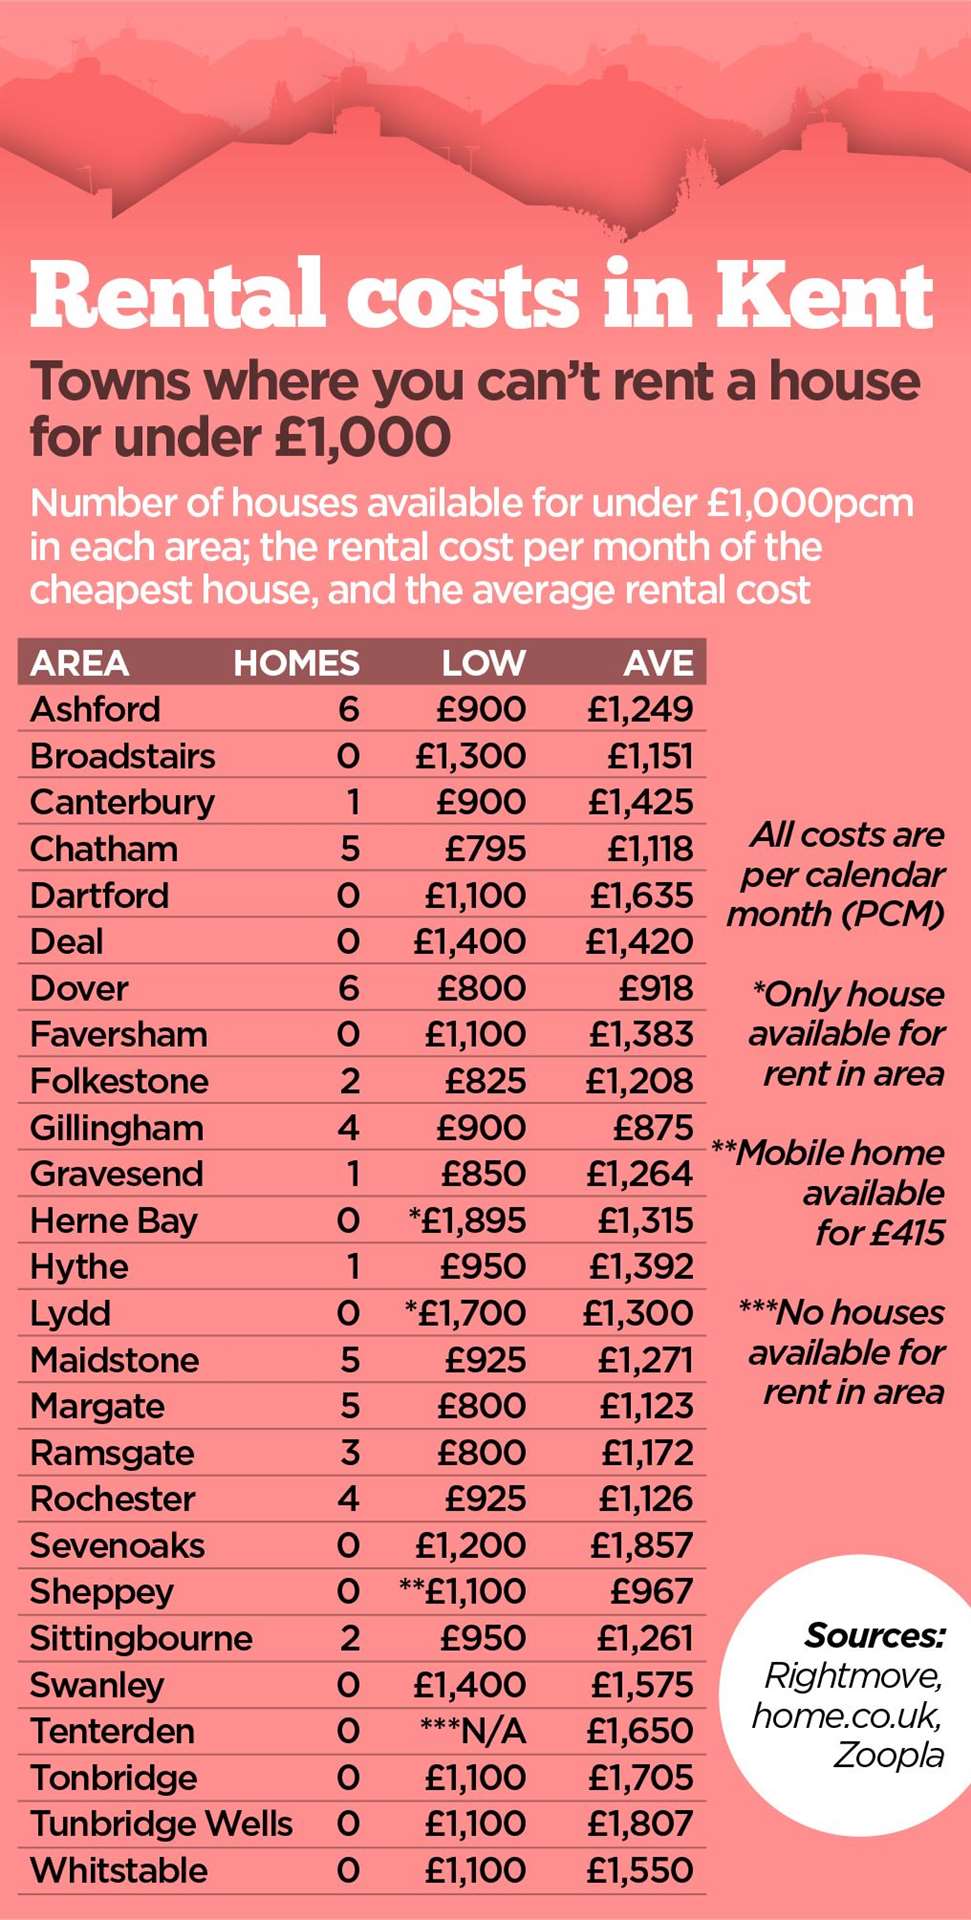 Figures taken from Zoopla, Rightmove and home.co.uk on April 26